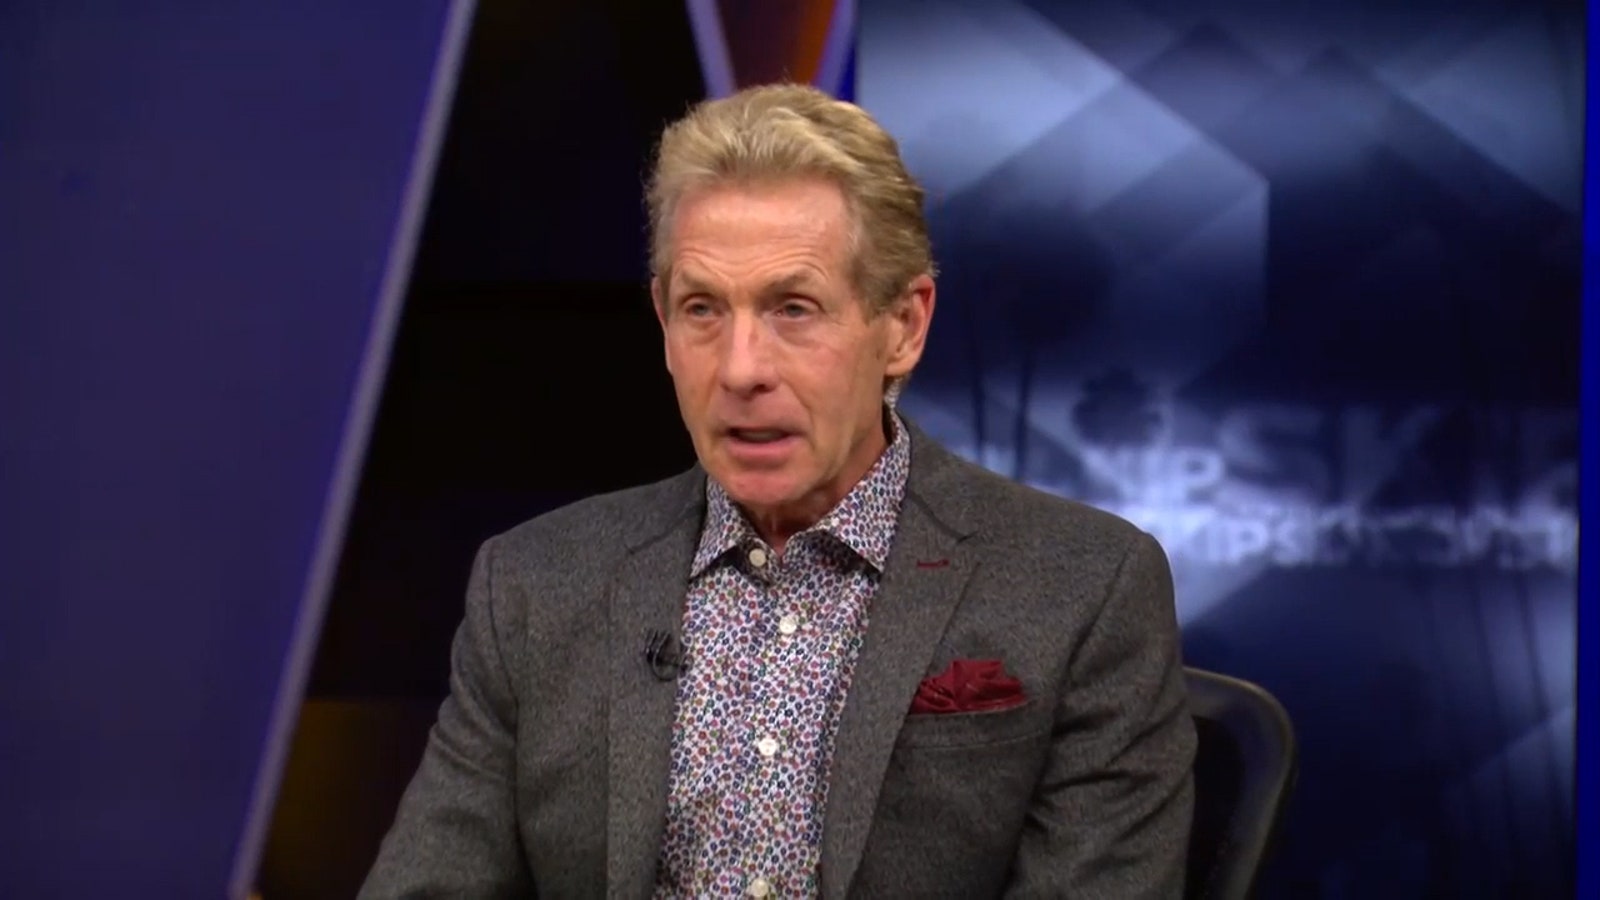 Skip Bayless questions Cowboys' DC Mike Nolan after players report that coaches are 'totally unprepared' | UNDISPUTED